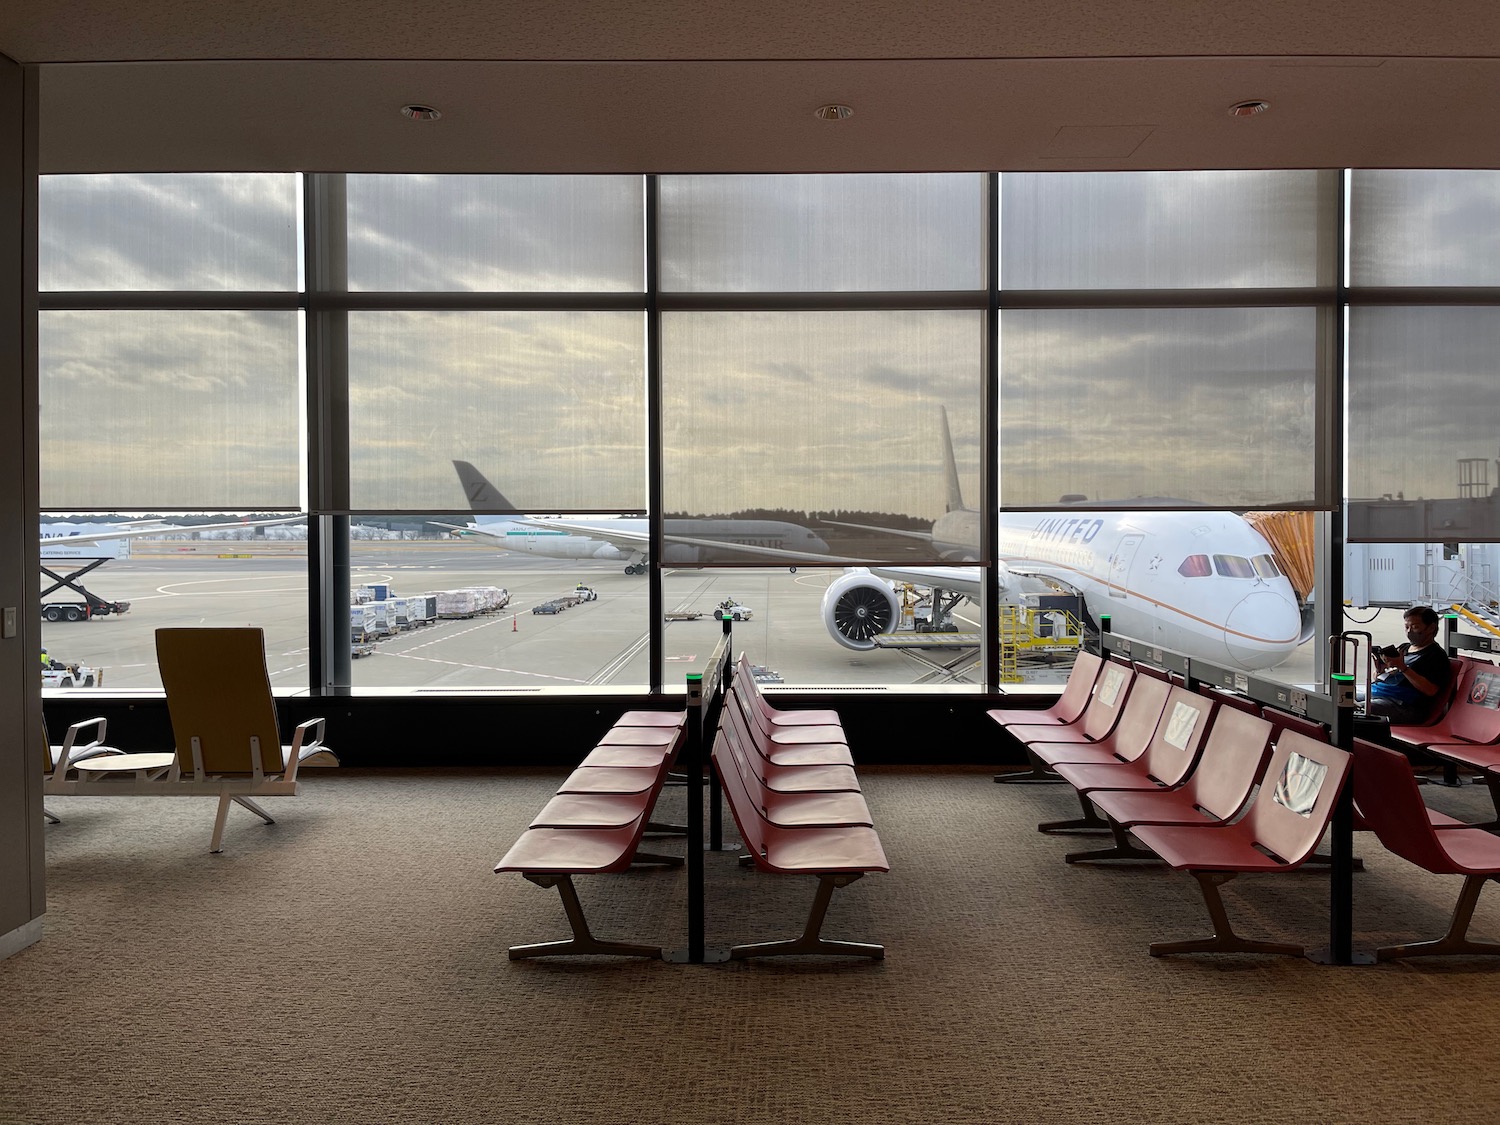 a room with chairs and a plane in the background